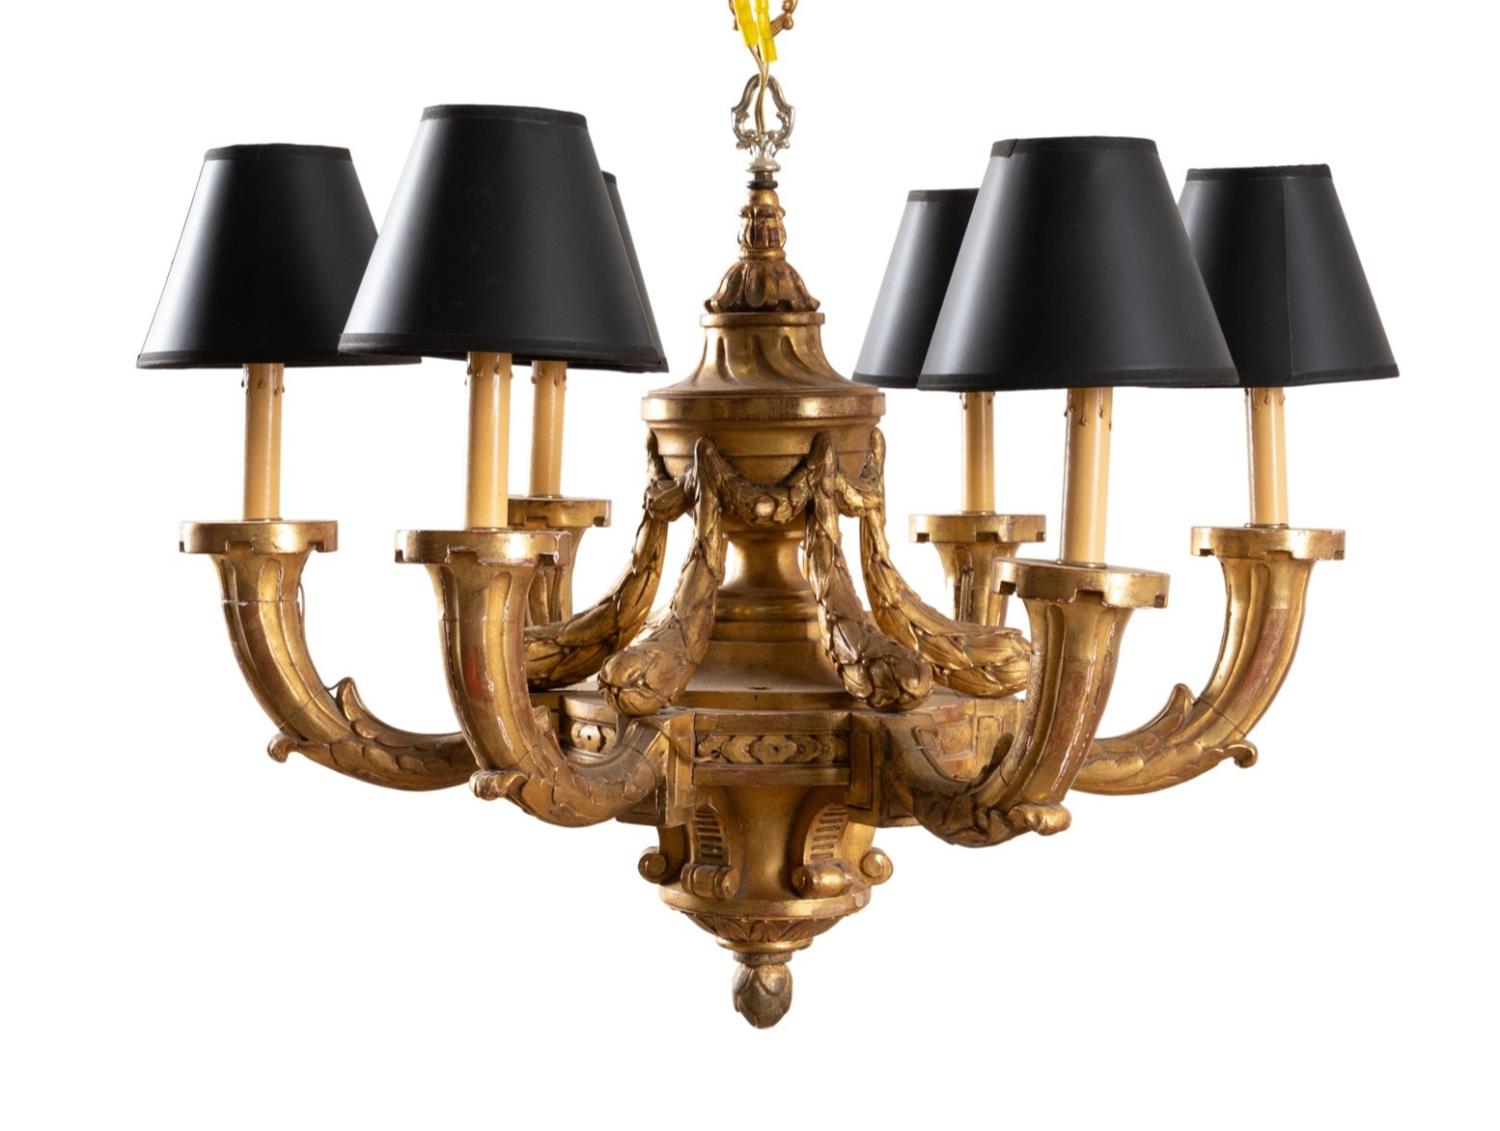 NEOCLASSICAL STYLE GILTWOOD CHANDELIER 2f996e